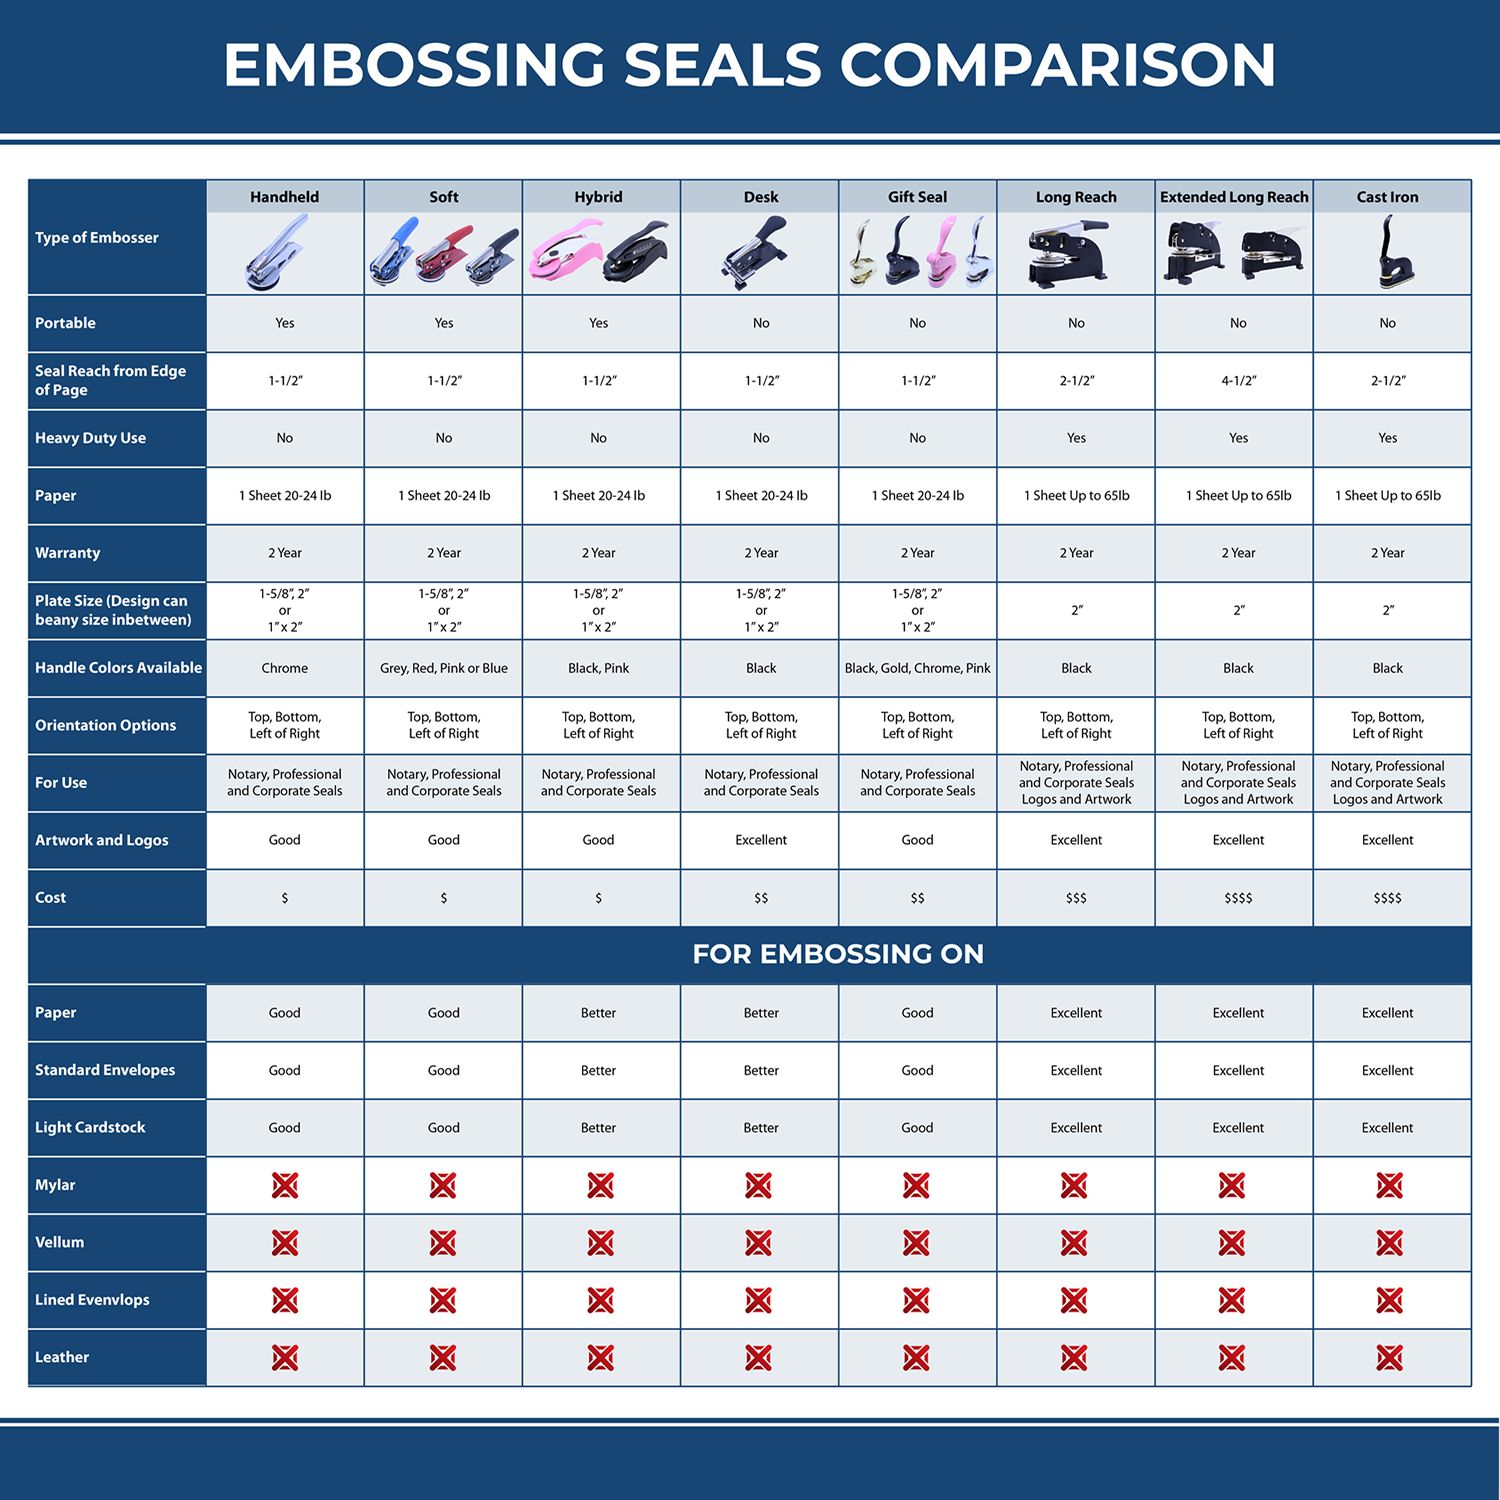 A comparison chart for the different types of mount models available for the Soft South Dakota Professional Geologist Seal